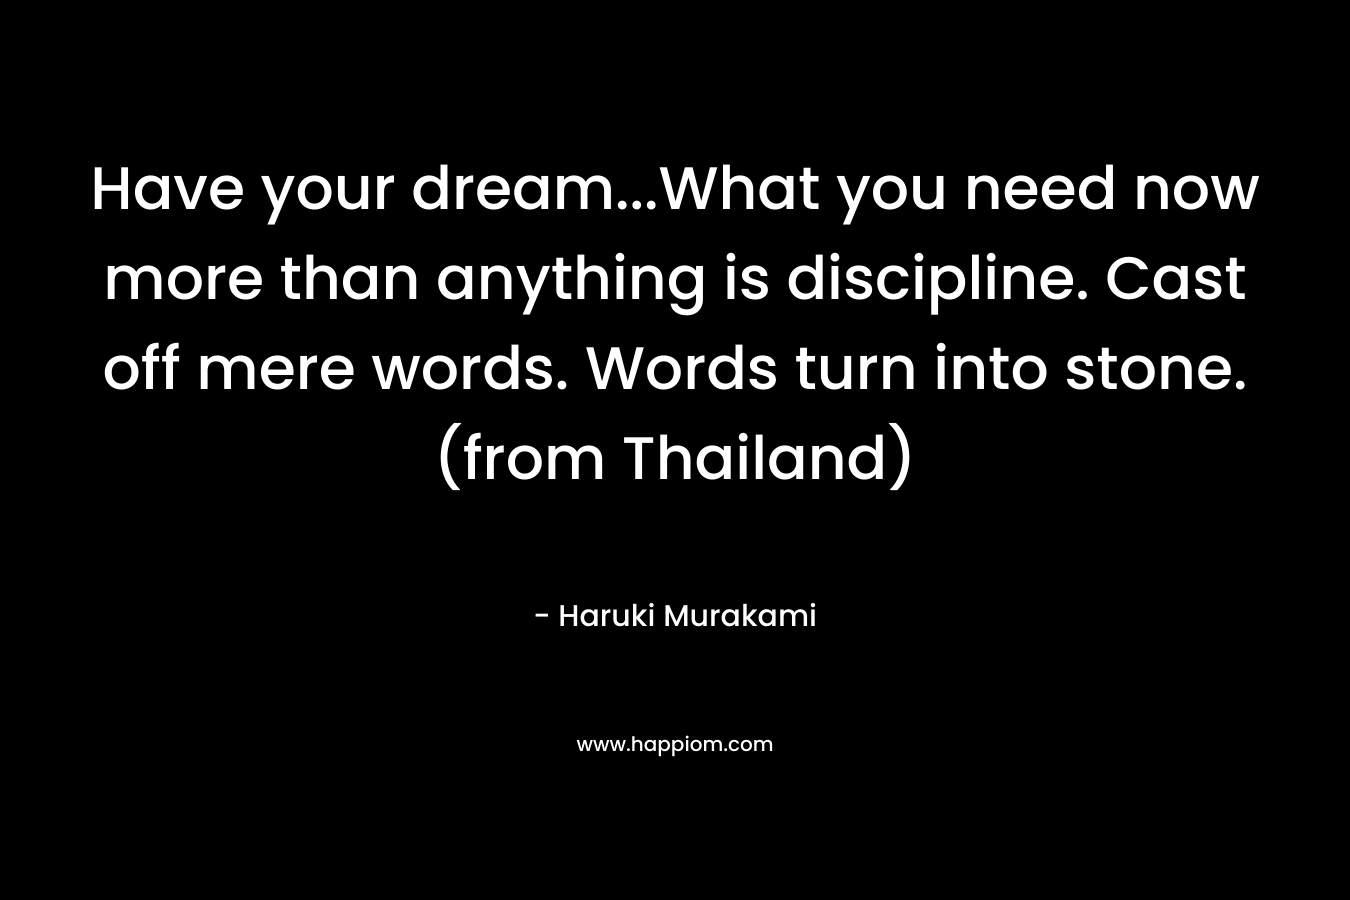 Have your dream...What you need now more than anything is discipline. Cast off mere words. Words turn into stone. (from Thailand)